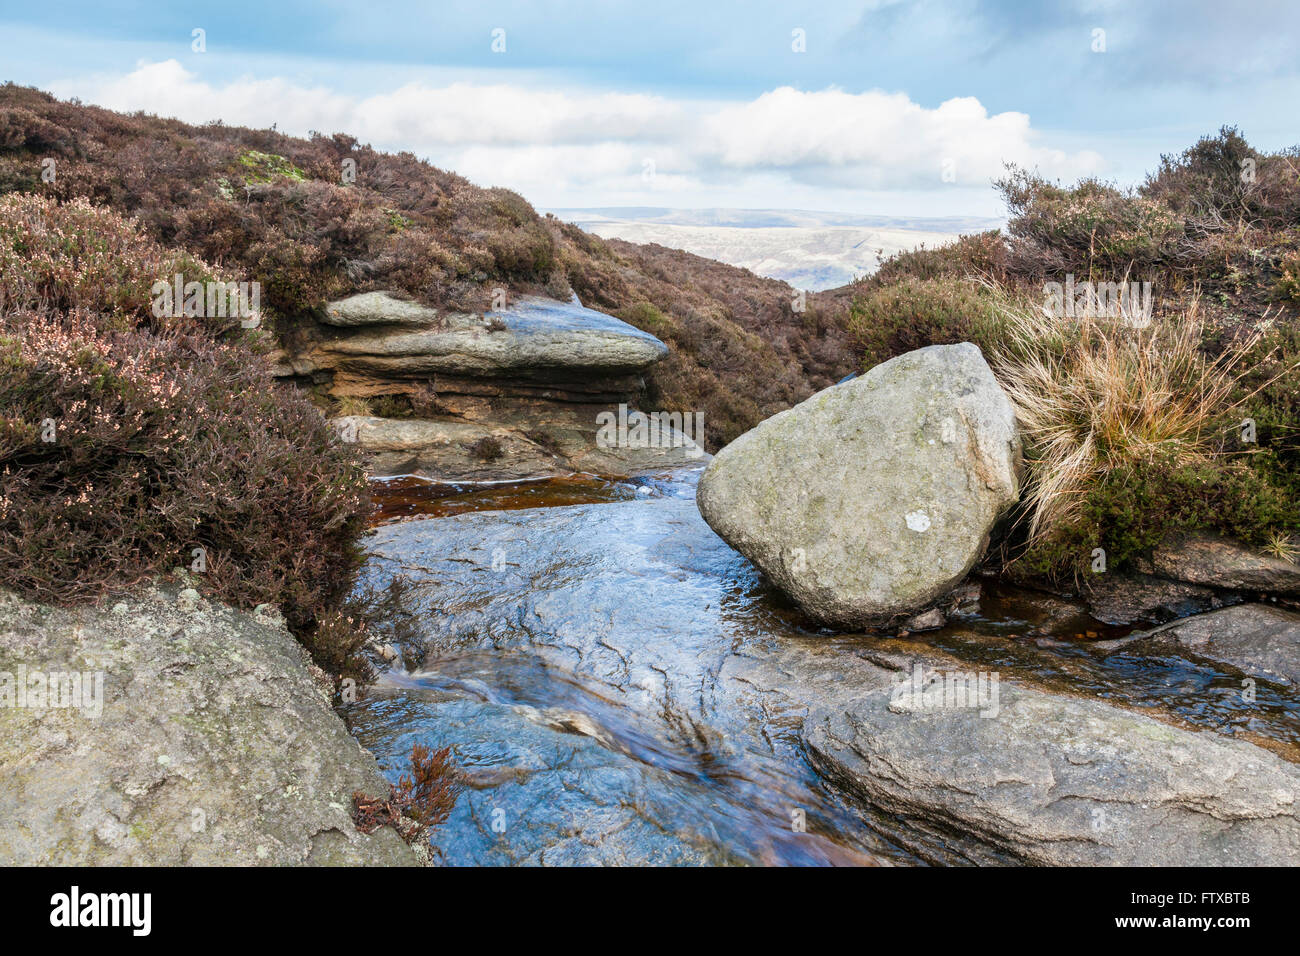 Stream flowing towards the edge of moorland on Kinder Scout, Derbyshire, Peak District National Park, England, UK Stock Photo